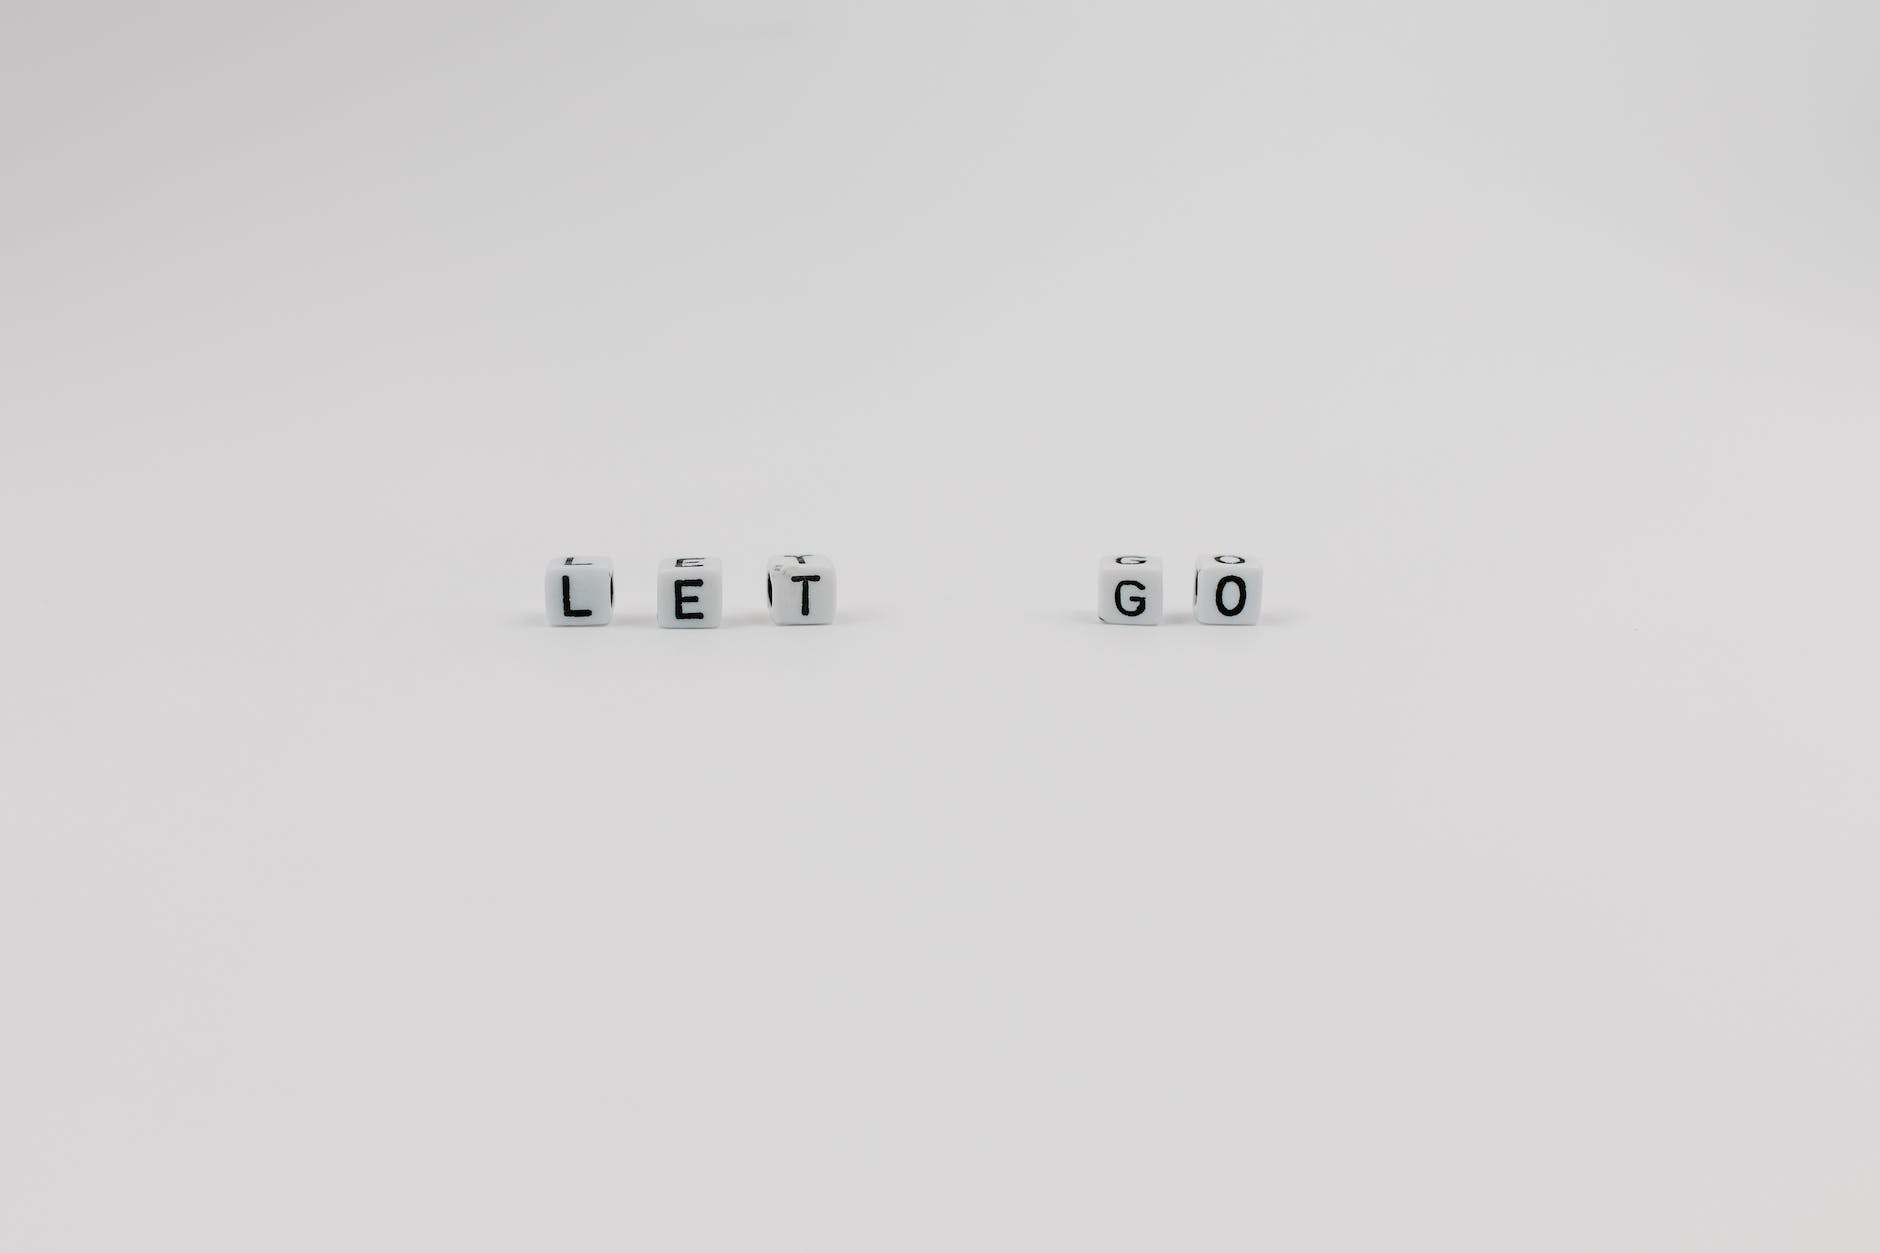 a let go slogan spelled with letter dice on white background